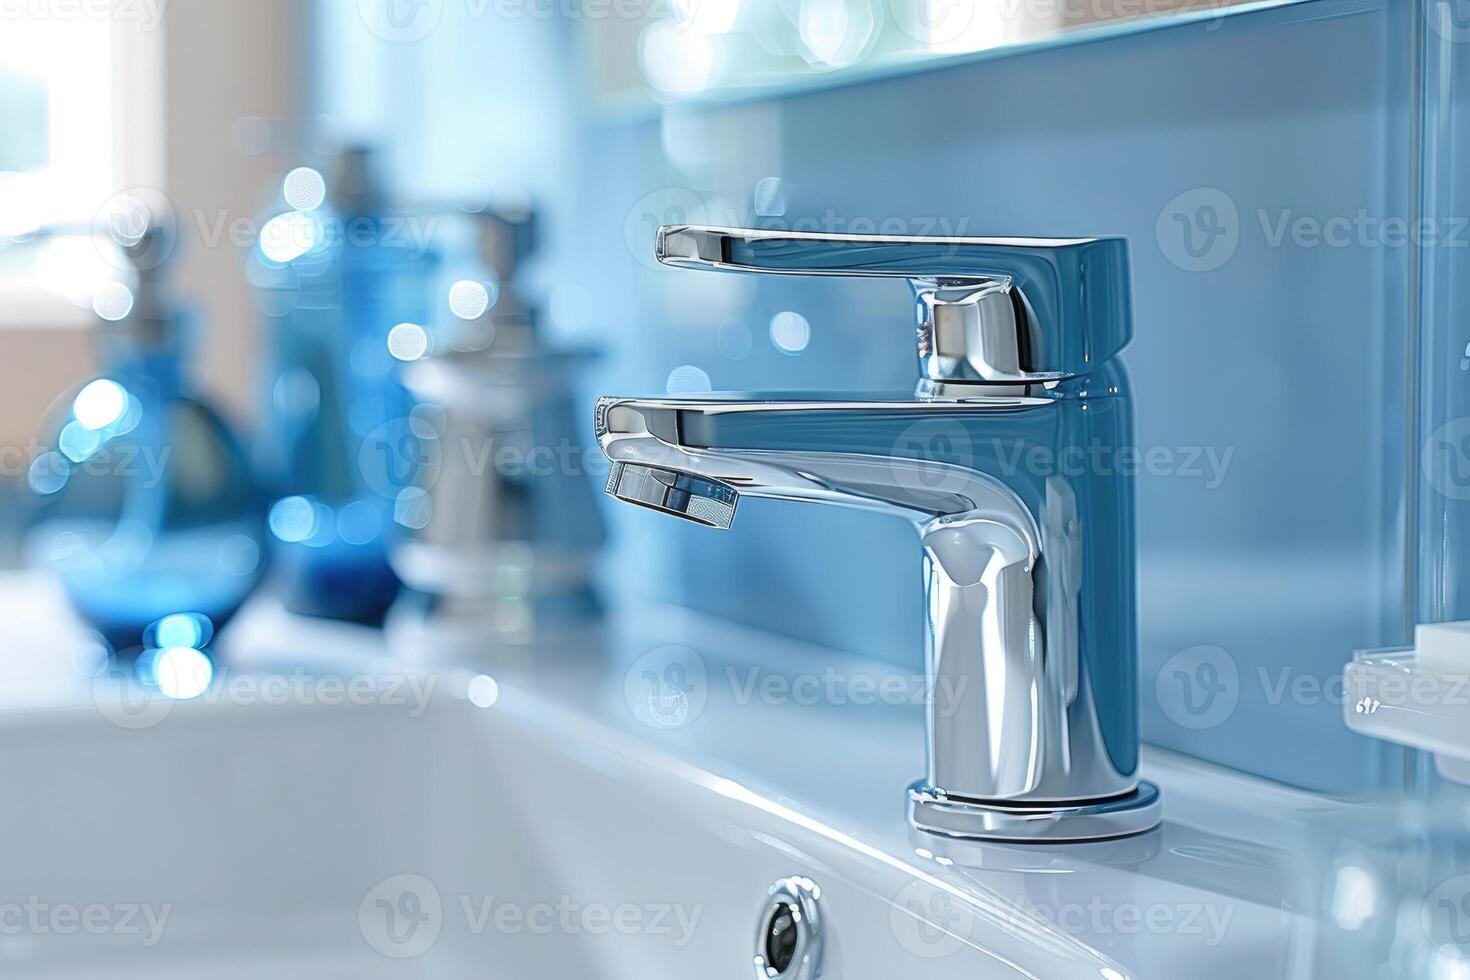 faucet in modern kitchen sink professional advertising photography photo